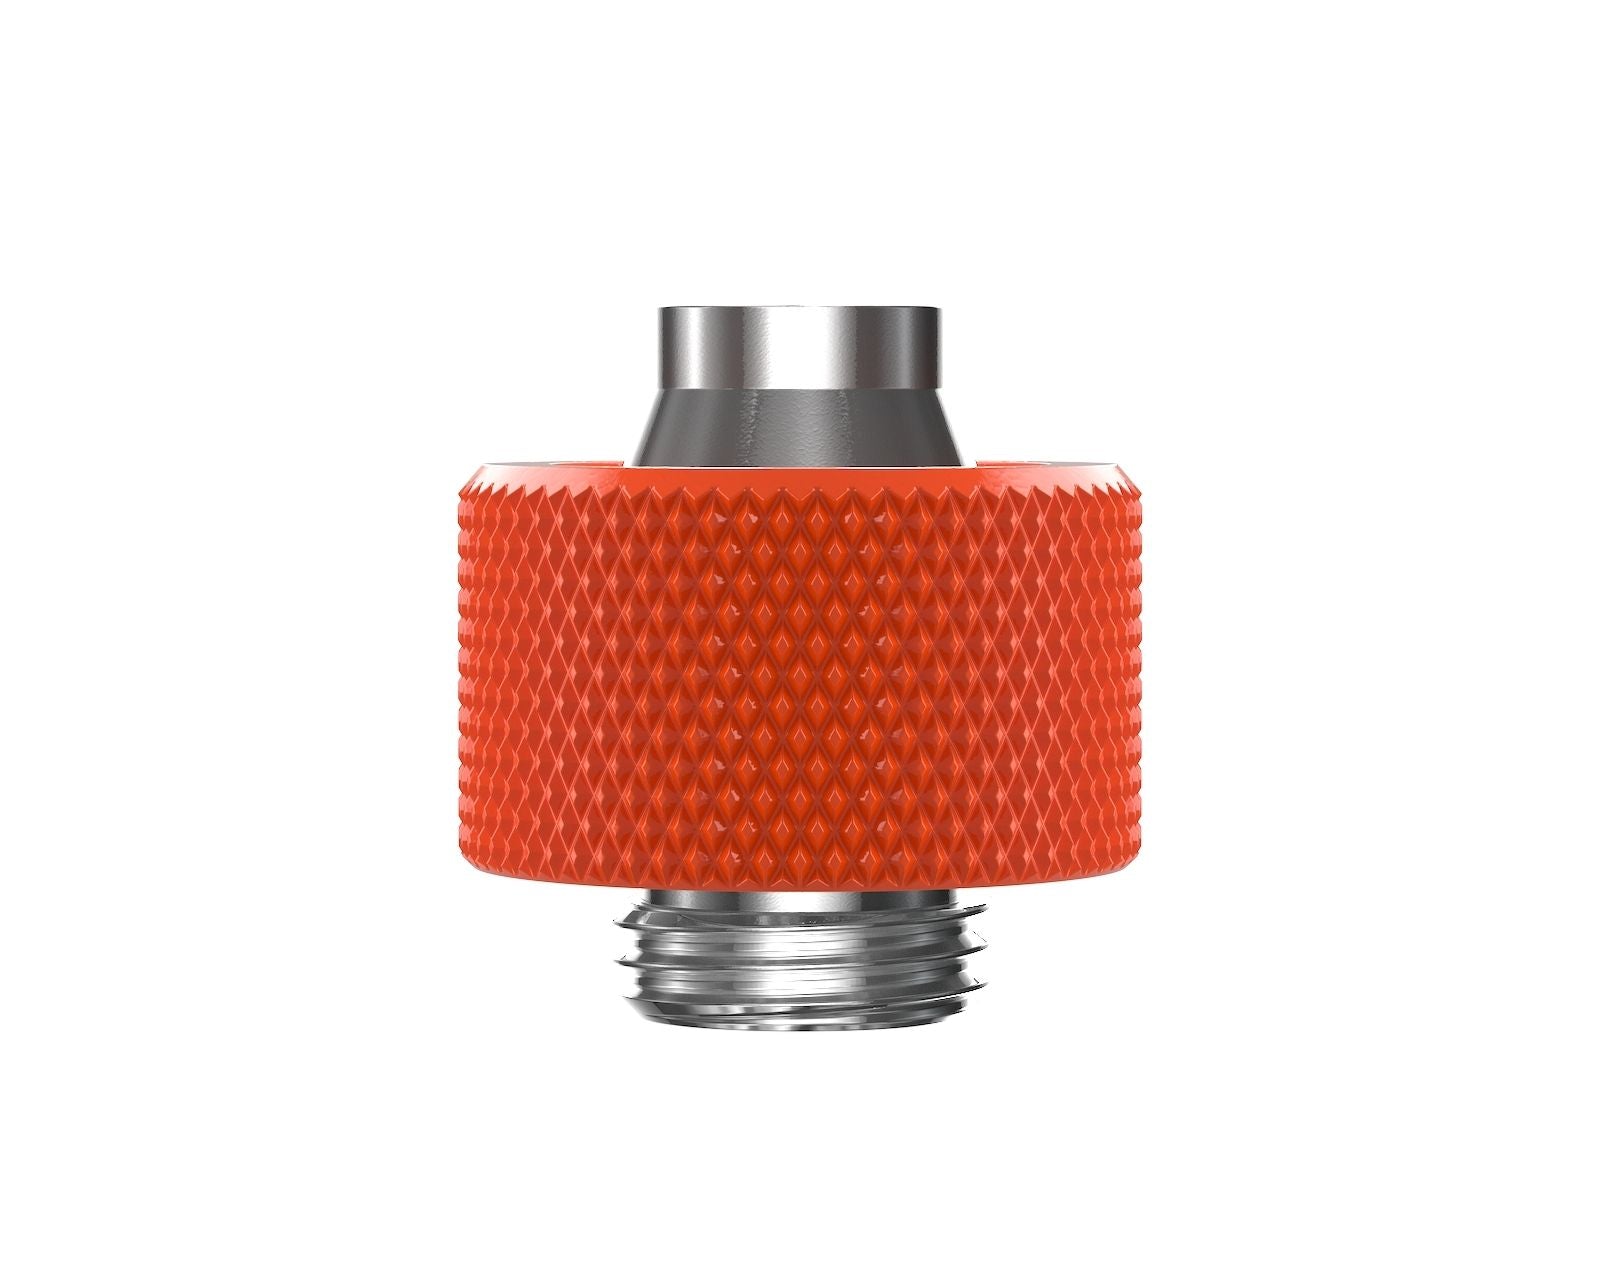 PrimoChill SecureFit SX - Premium Compression Fitting For 7/16in ID x 5/8in OD Flexible Tubing (F-SFSX758) - Available in 20+ Colors, Custom Watercooling Loop Ready - UV Orange